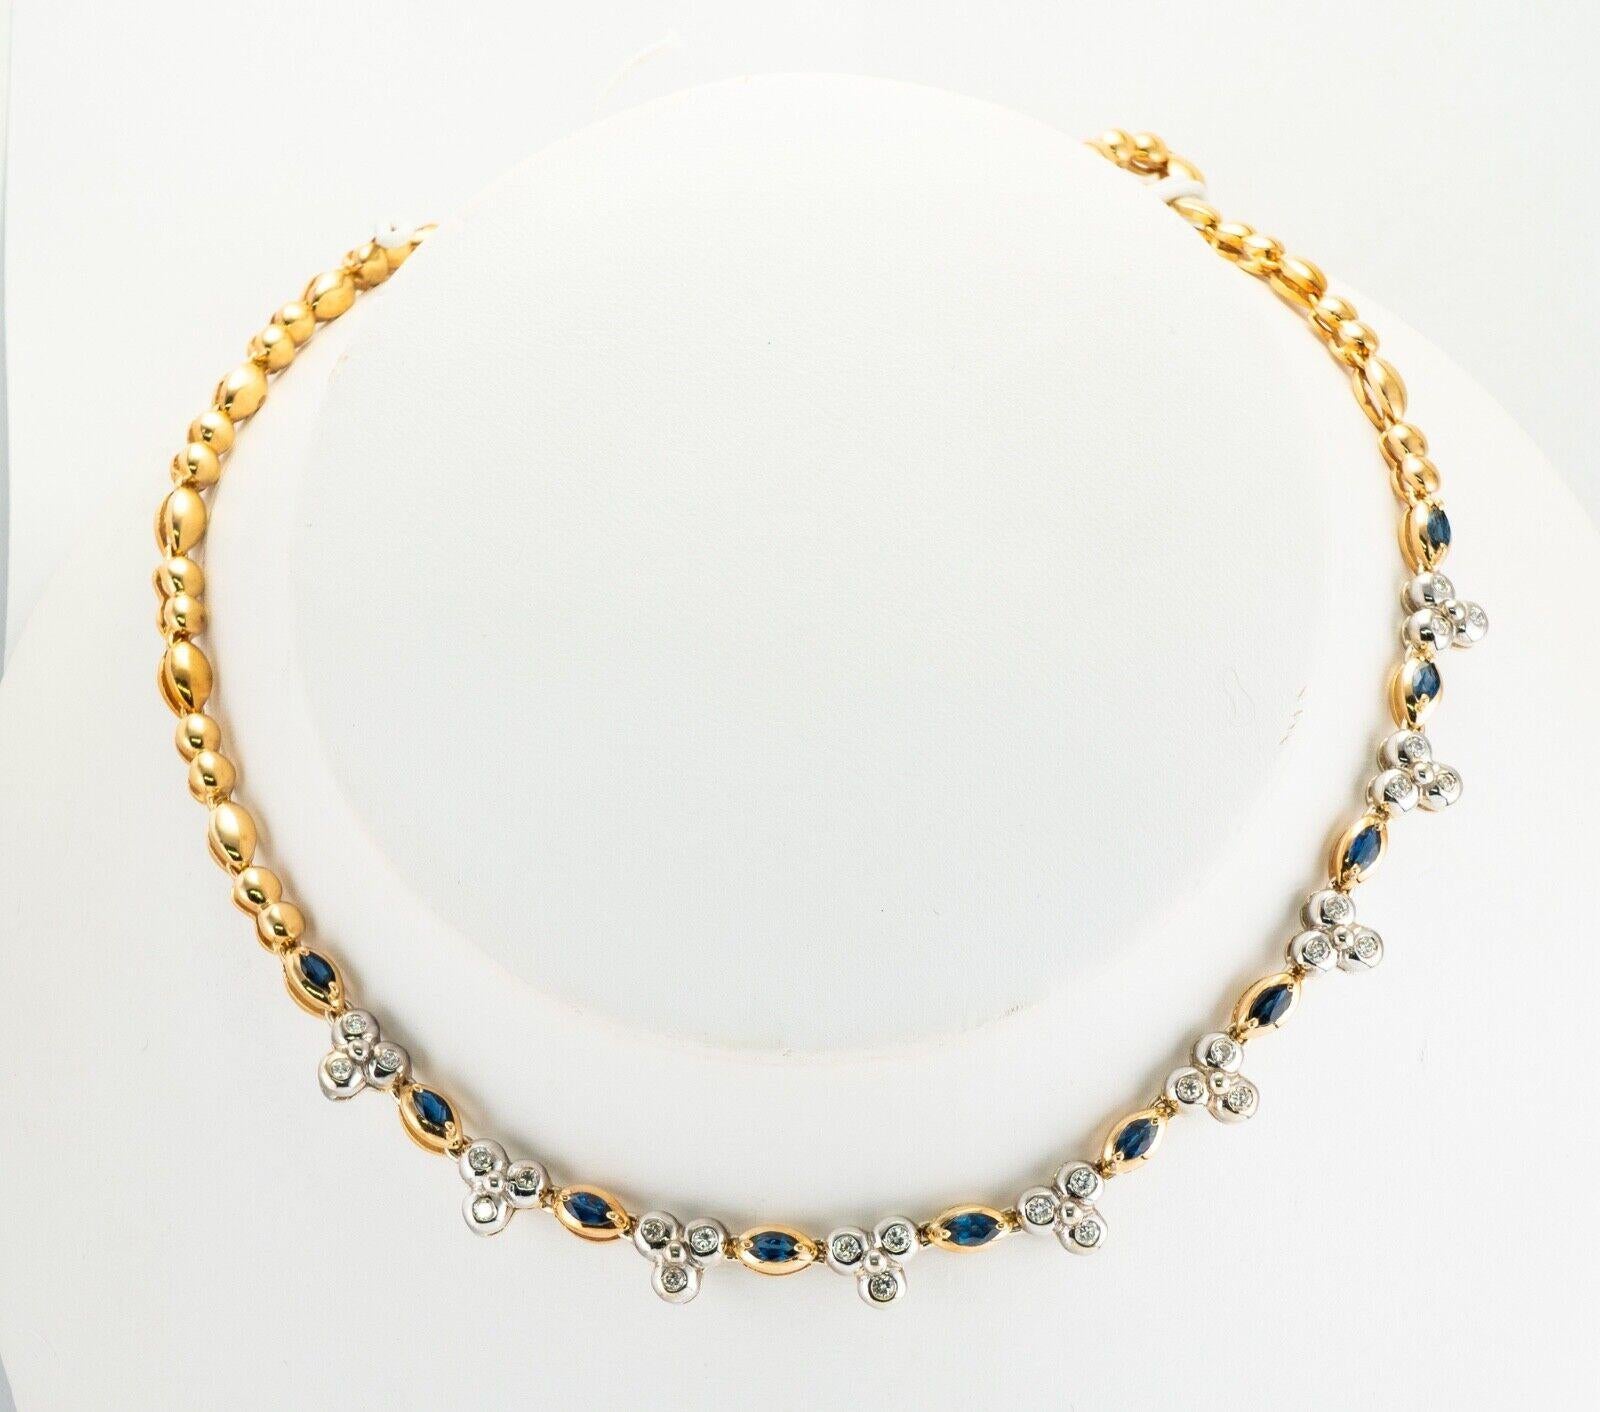 Diamond Sapphire Necklace 14K Gold Choker

This gorgeous estate necklace is finely crafted in solid 14K Yellow gold and set with genuine Earth mined Sapphires and Diamonds. Ten marquise cut Sapphires measure 5mm x 2.5mm for the total 2.40 carats.